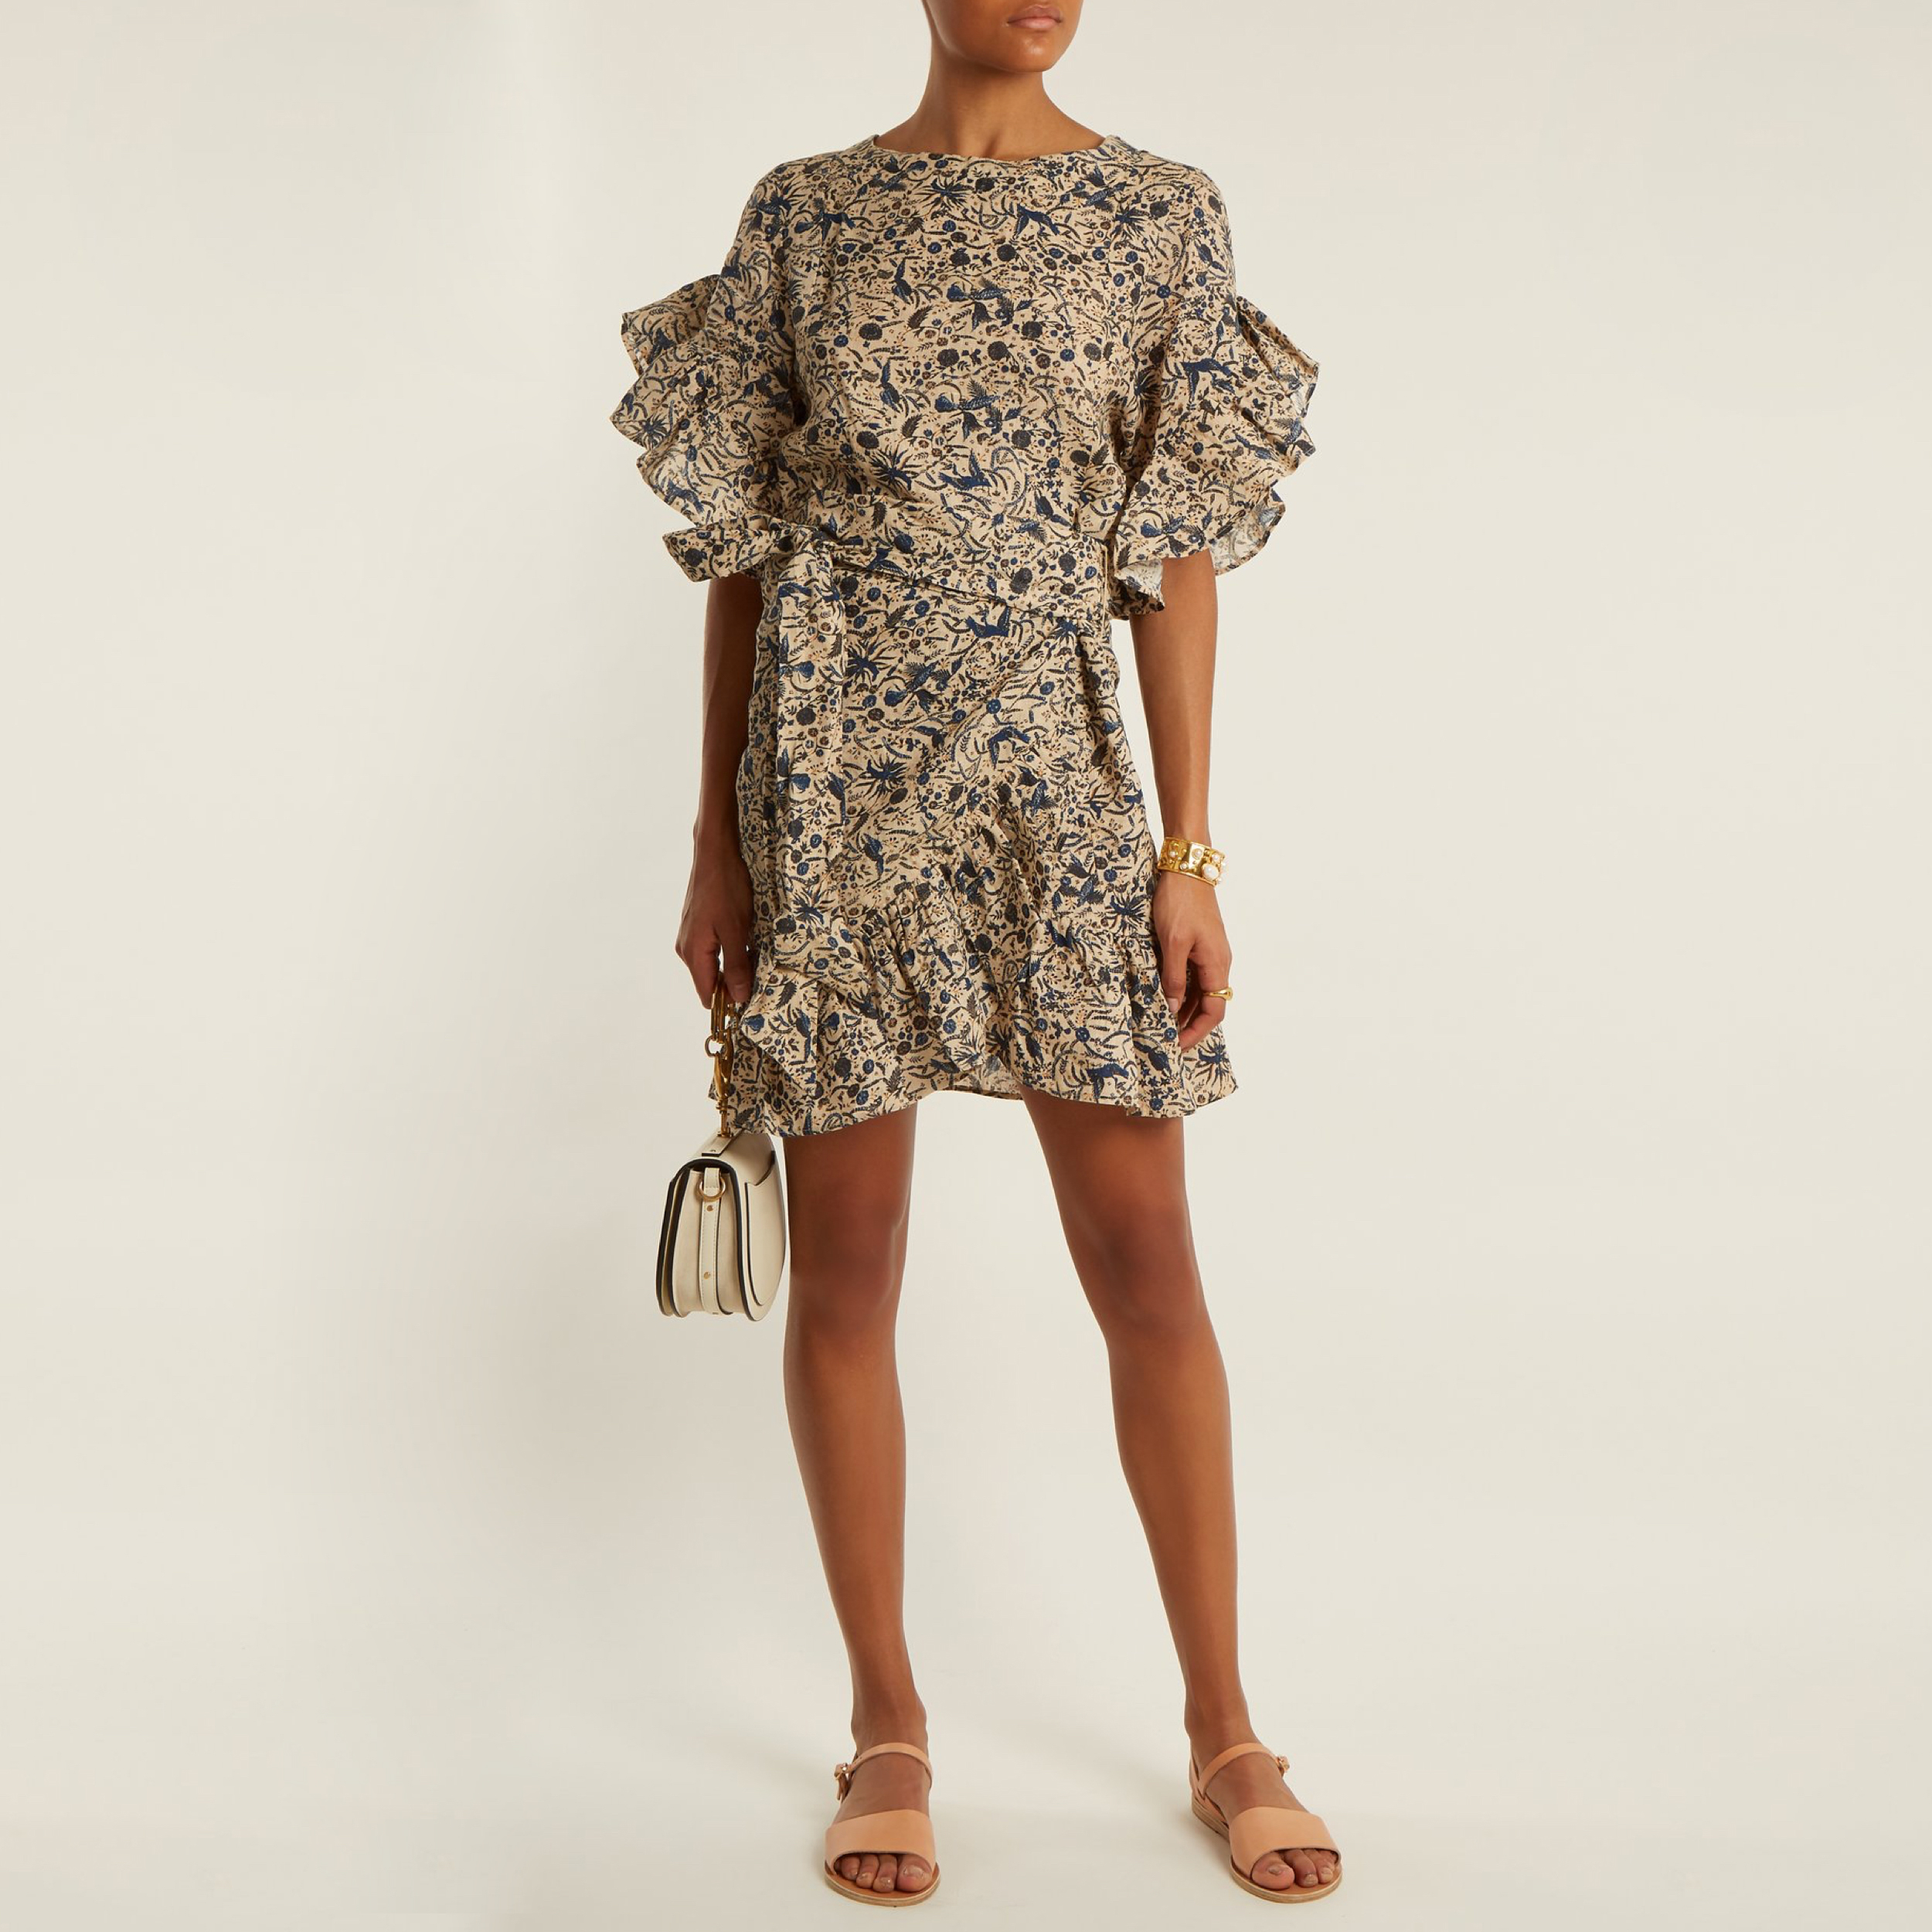 Bakterie Supersonic hastighed scrapbog Printed Ruffle Dress by Isabel Marant Etoile - Find Love Buy